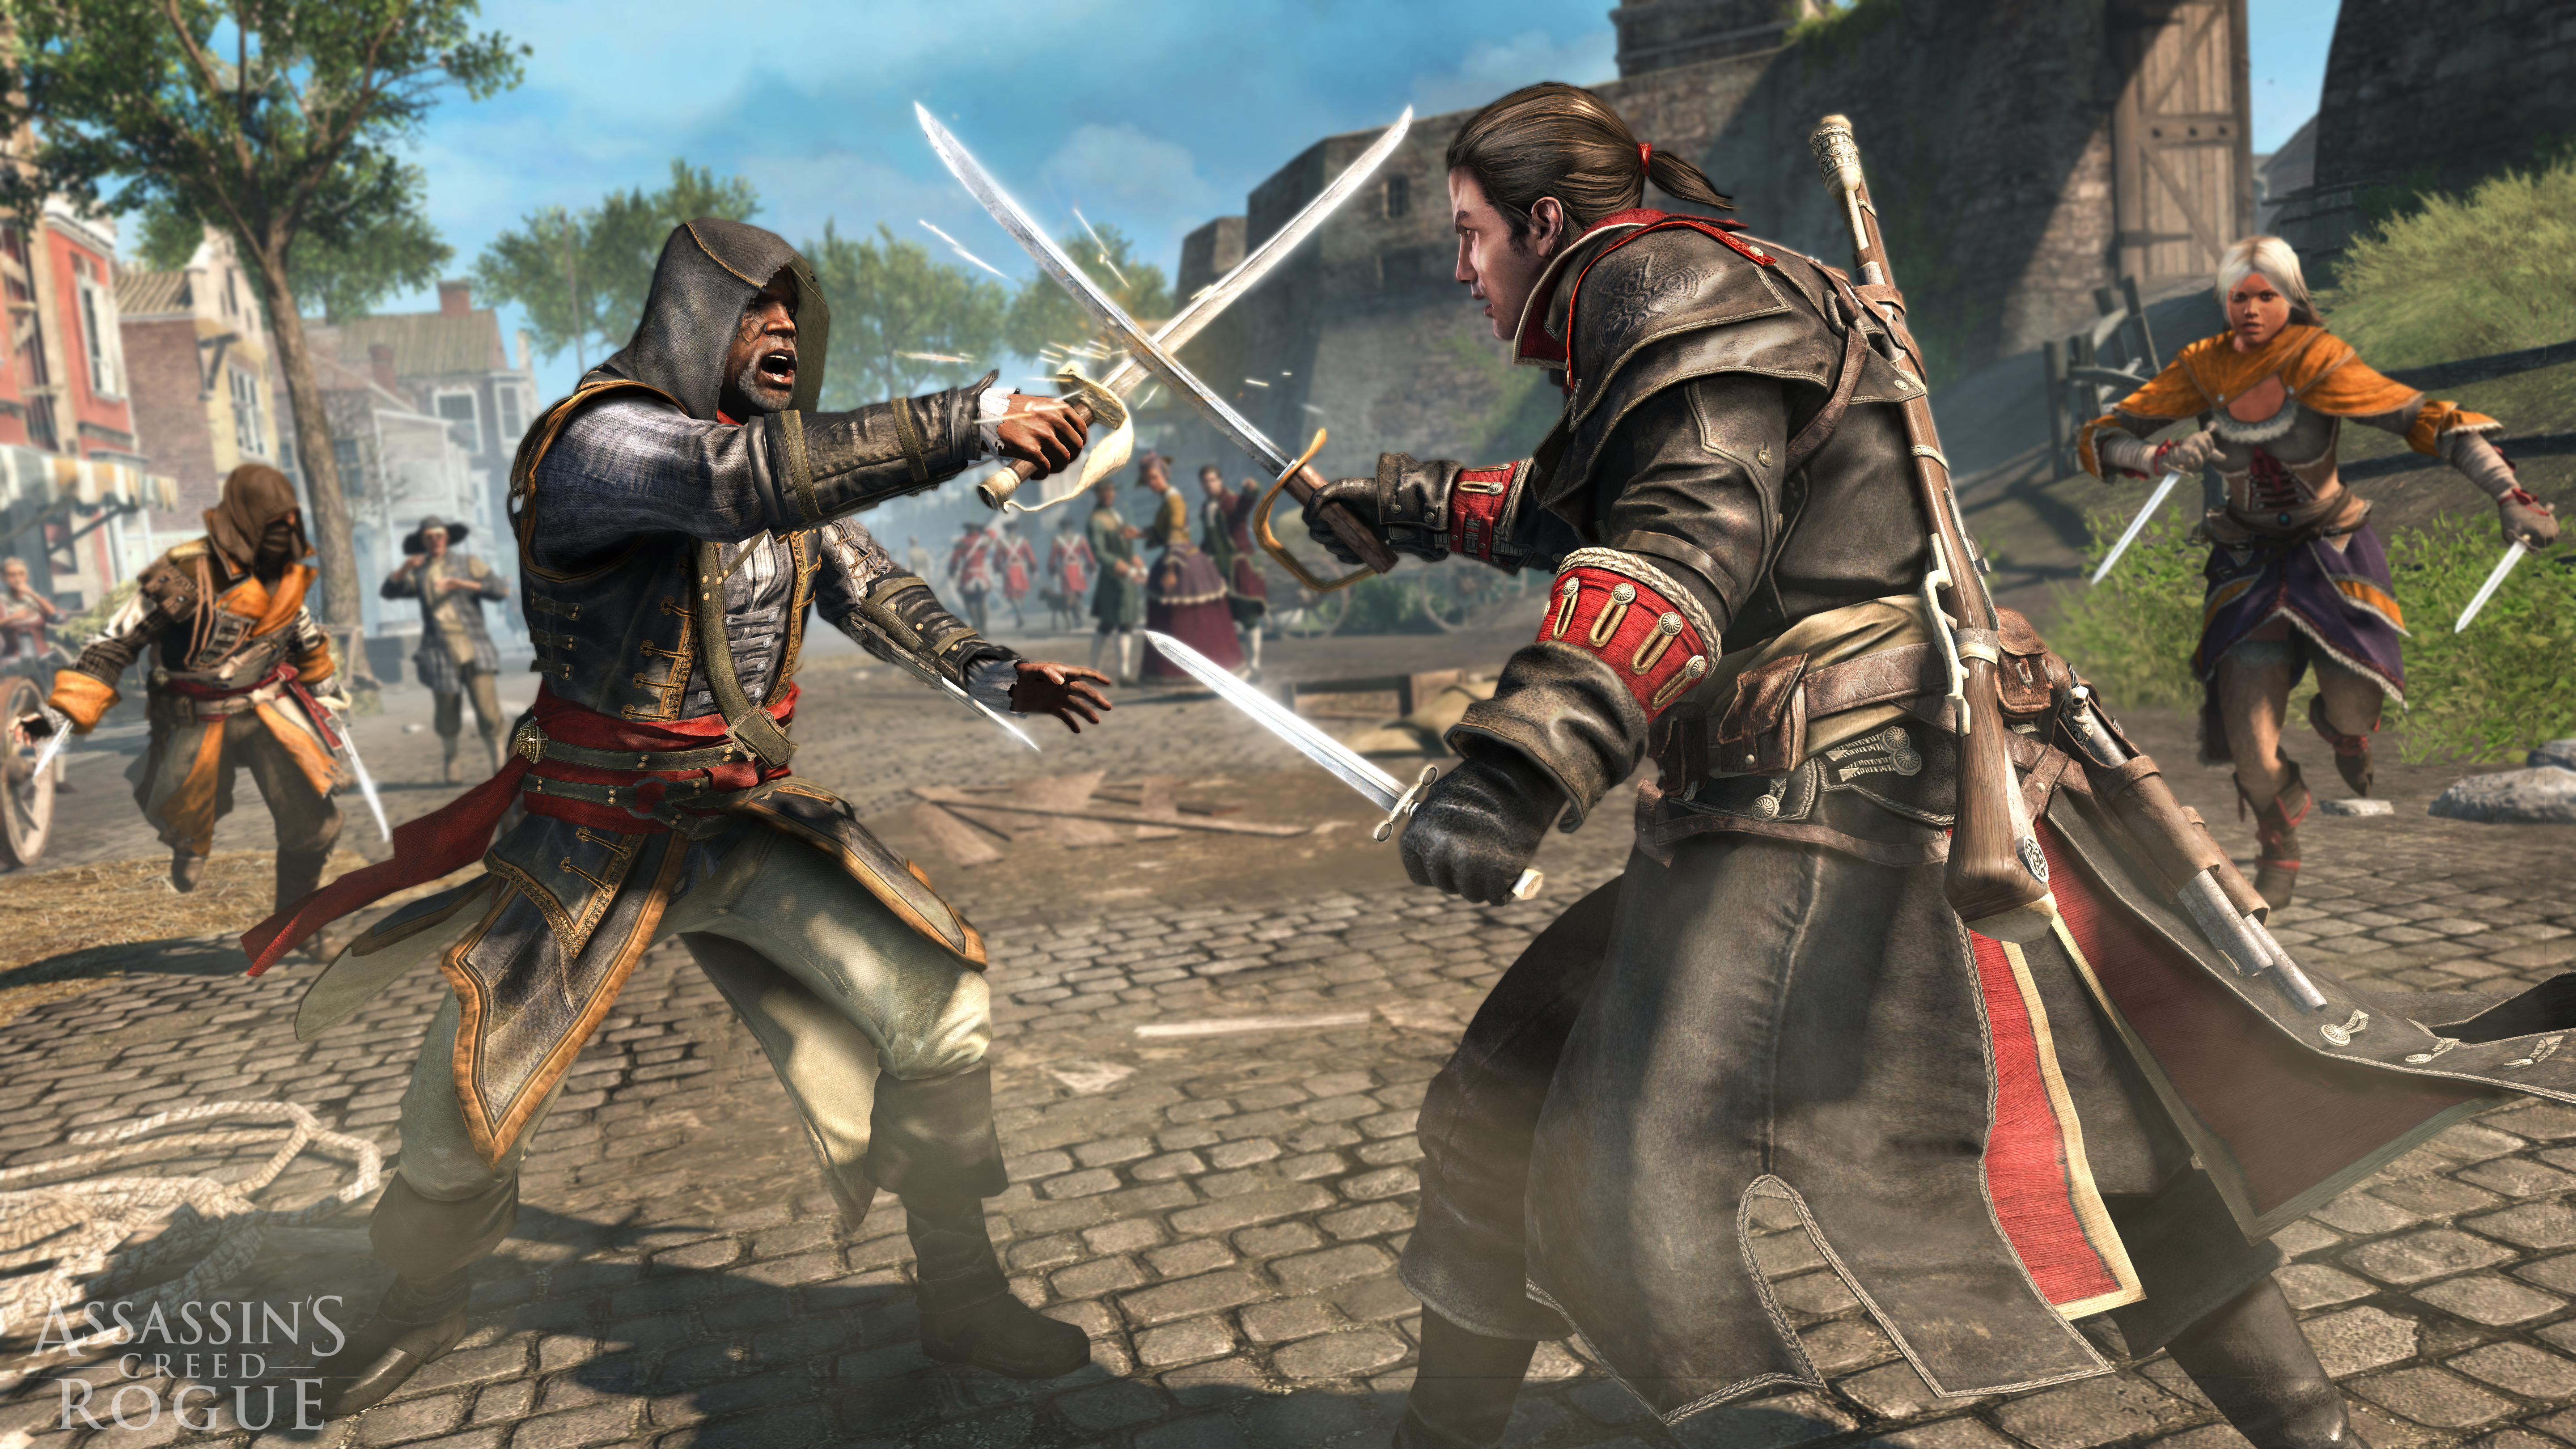 assassin's creed: rogue, video game, assassin's creed